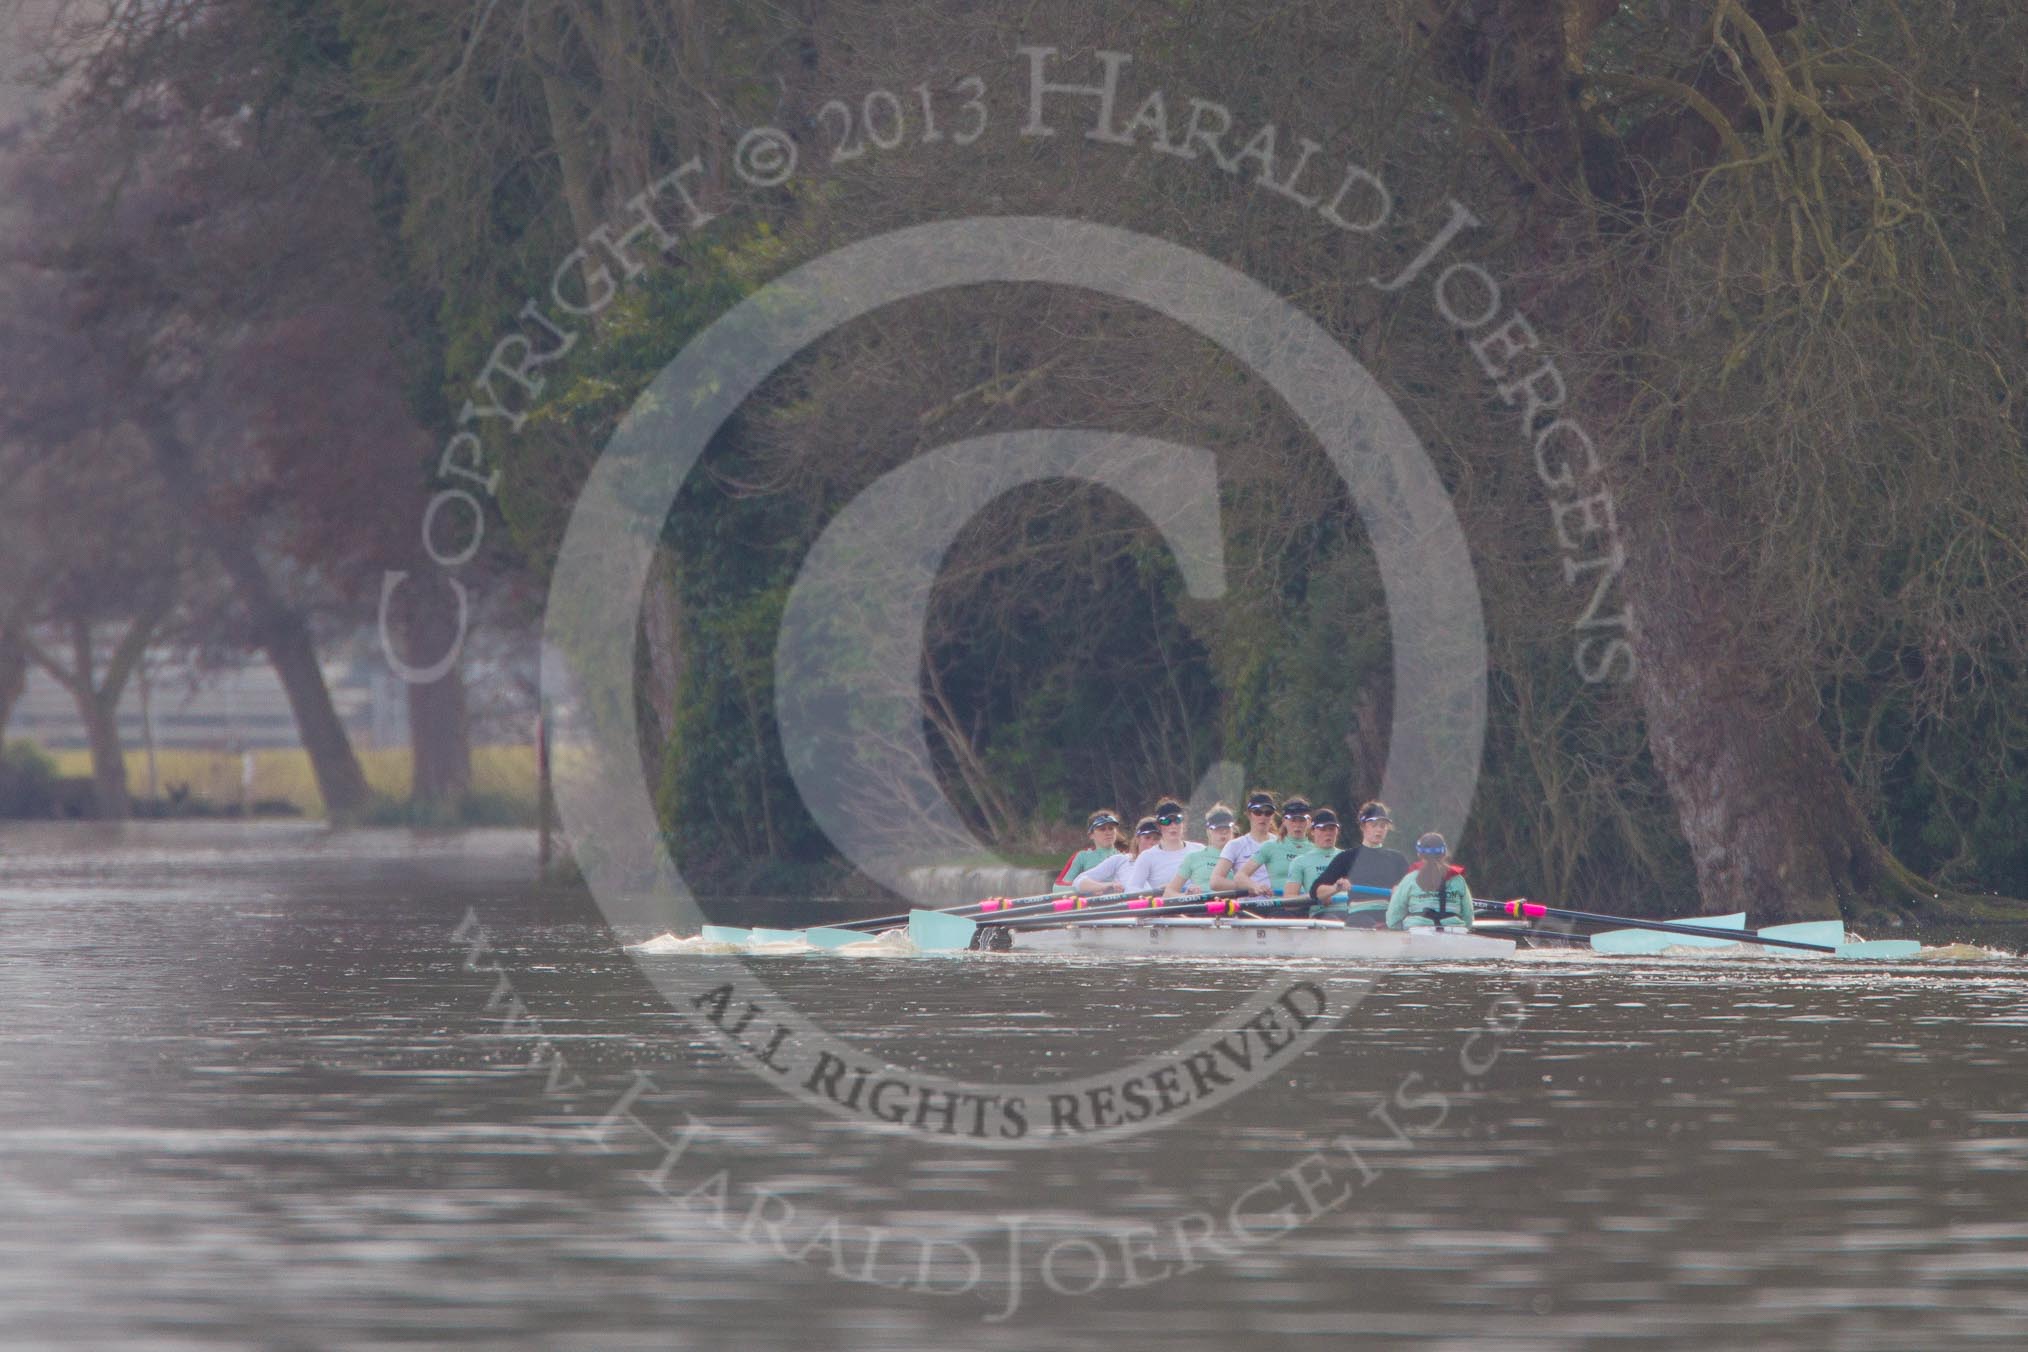 The Boat Race season 2013 - CUWBC training: The CUWBC Blue Boat - bow Caroline Reid, 2 Fay Sandford, 3 Melissa Wilson, 4  Jessica Denman, 5 Vicky Shaw, 6 Claire Watkins, 7 Emily Day, stroke Holly Game, and cox Esther Momcilovic..
River Thames near Remenham,
Henley-on-Thames,
Oxfordshire,
United Kingdom,
on 19 March 2013 at 16:10, image #127